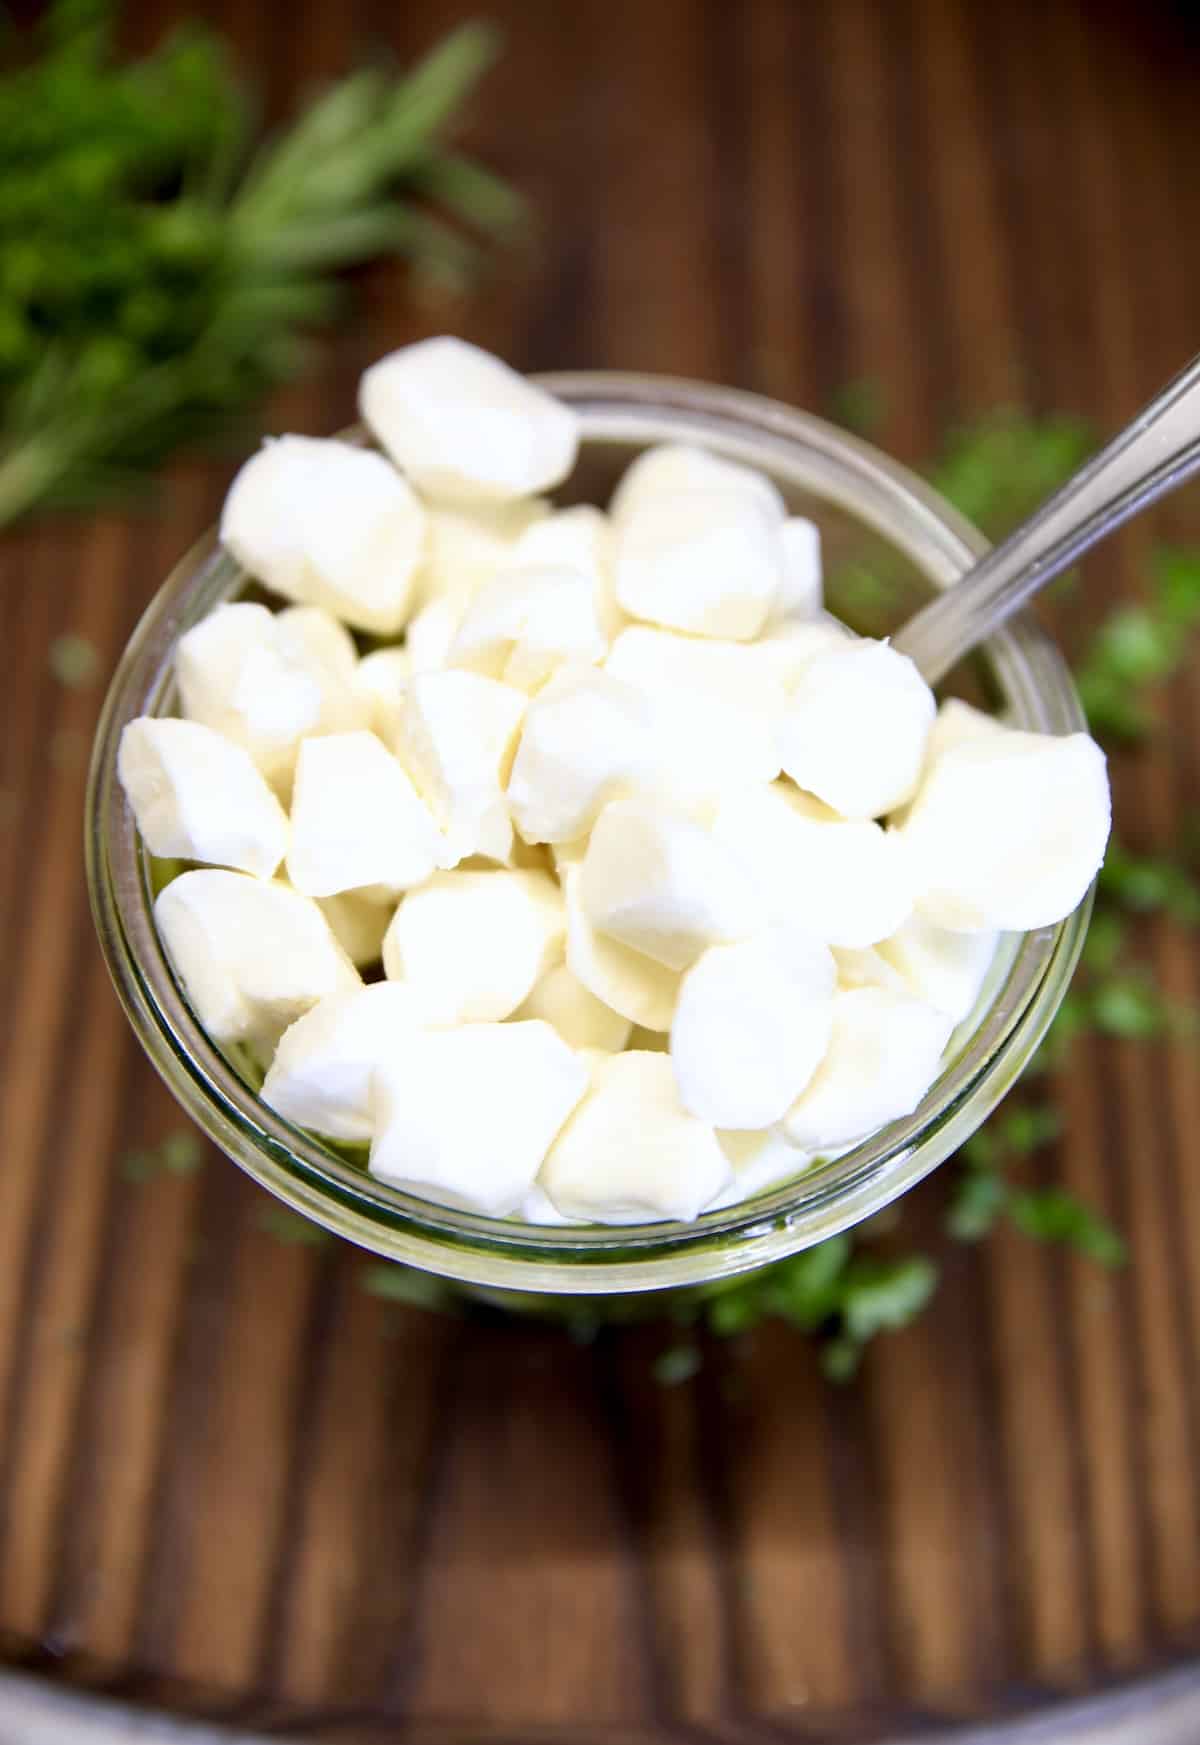 Mozzarella pearls in a jar with olive oil marinade.